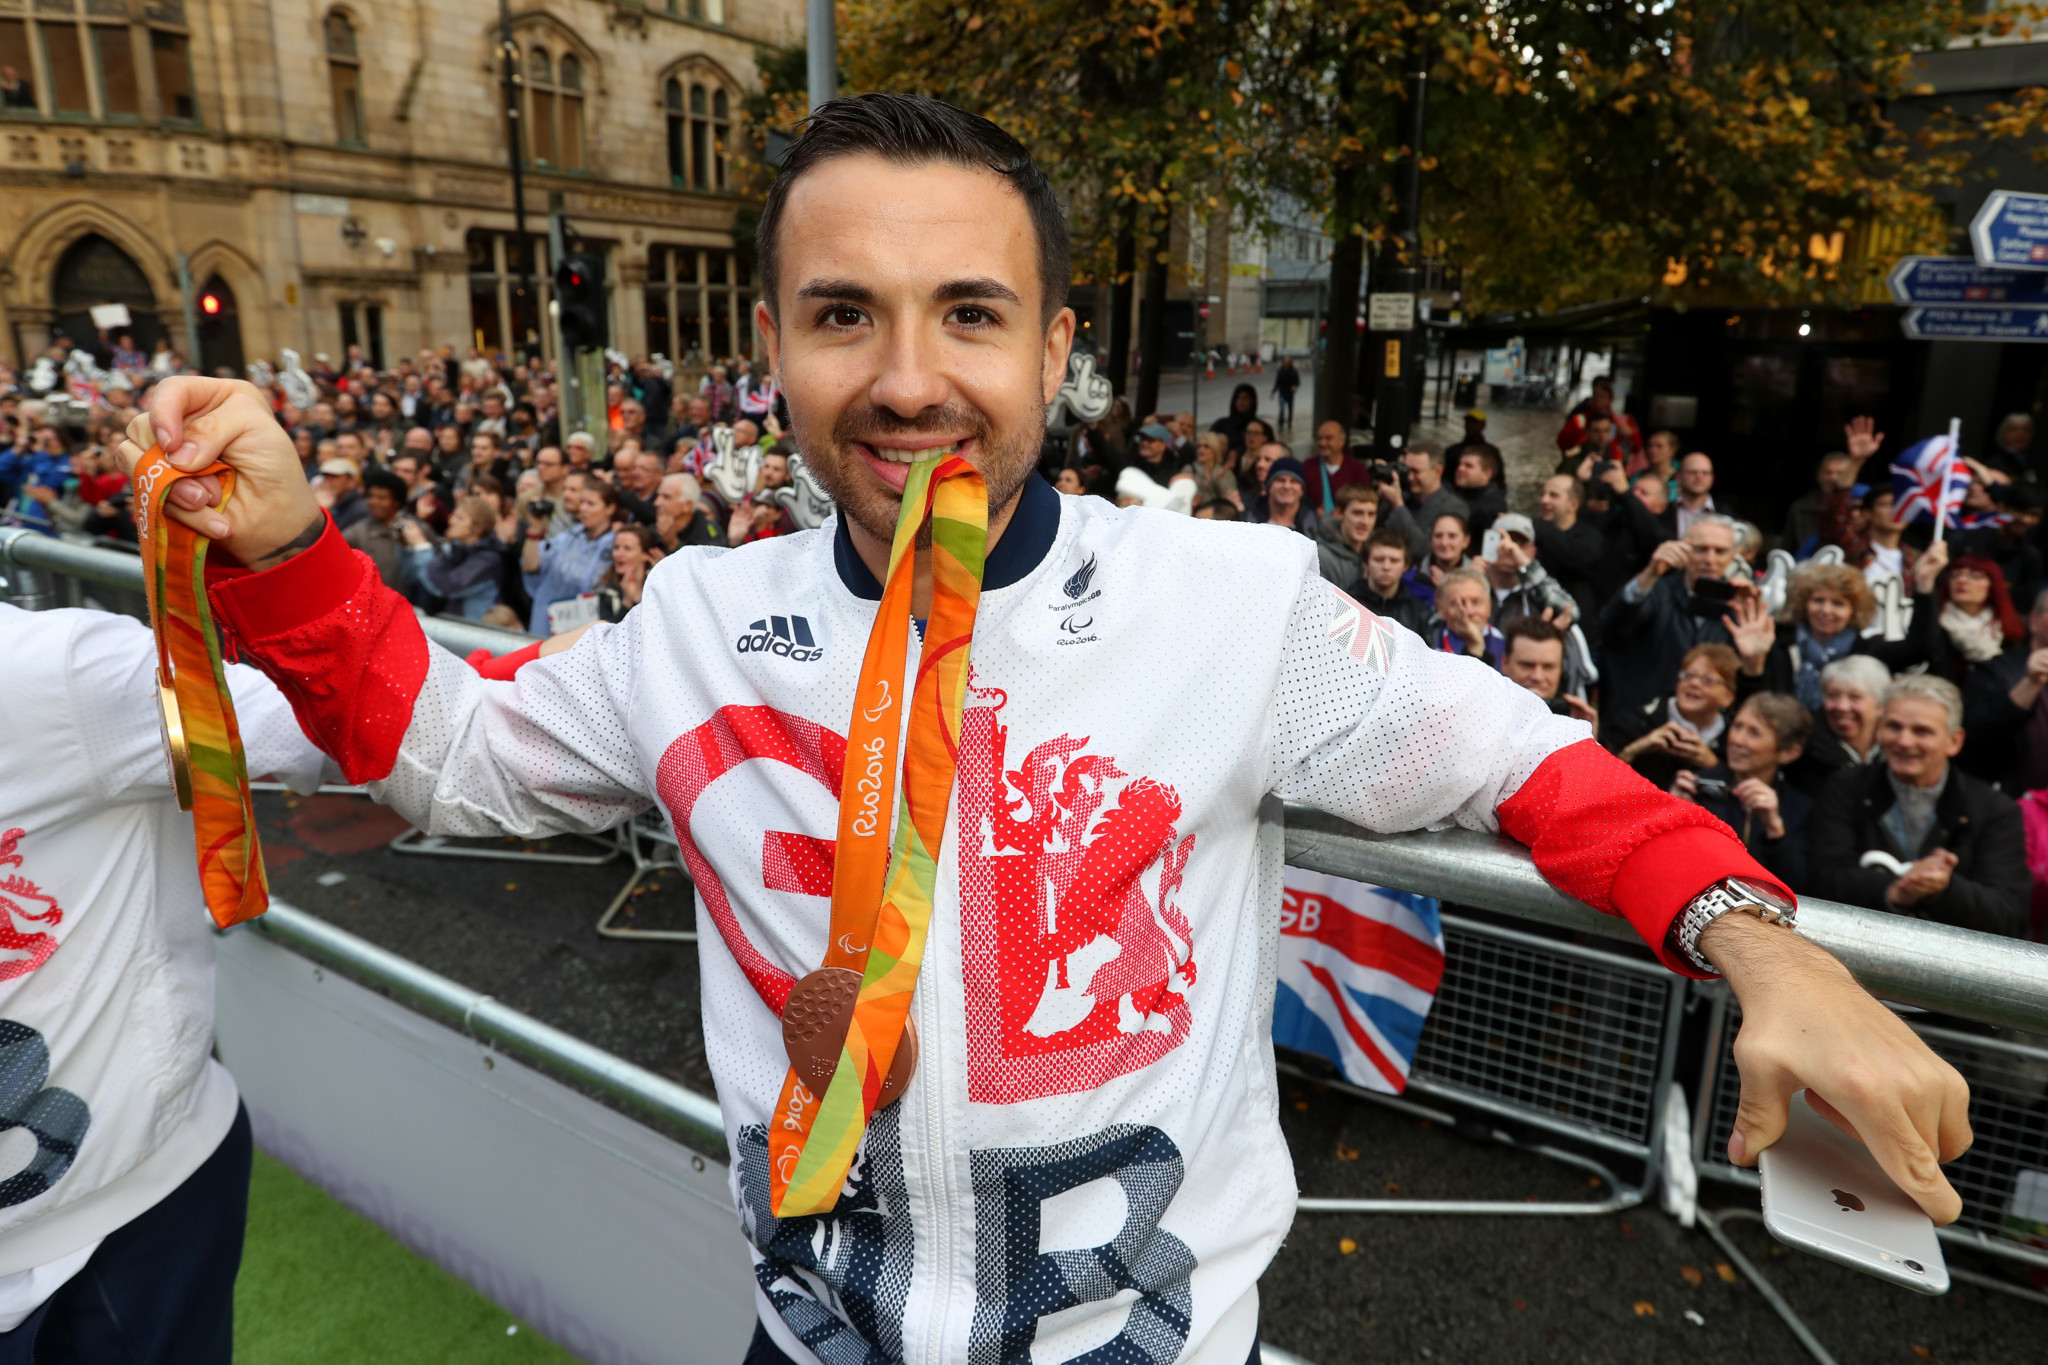 Paralympic table tennis champion Will Bayley signs up for Strictly Come Dancing